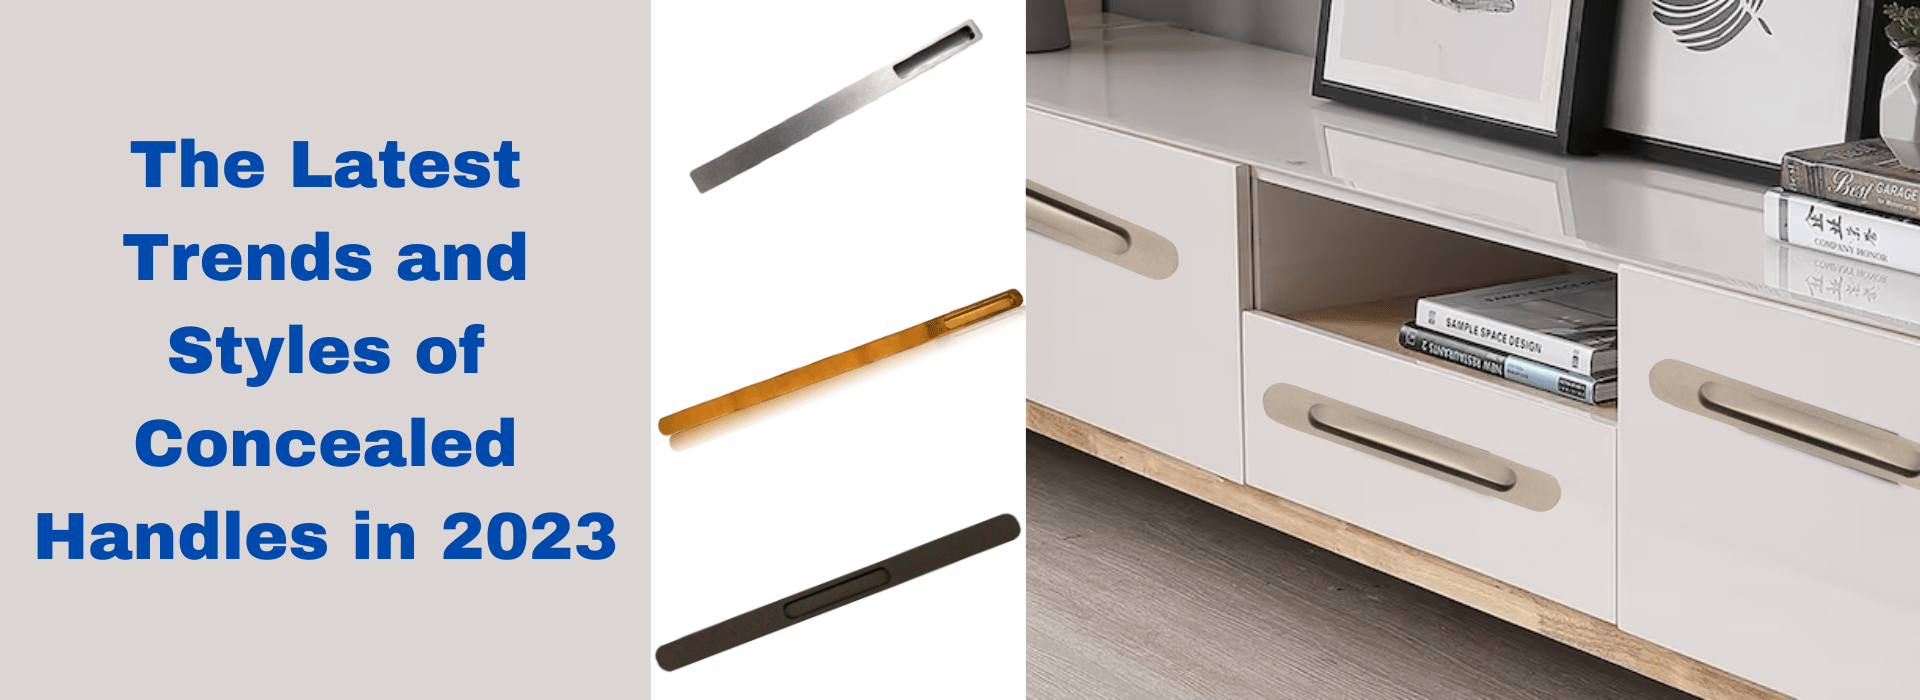 The latest trends and styles of concealed handles in 2023